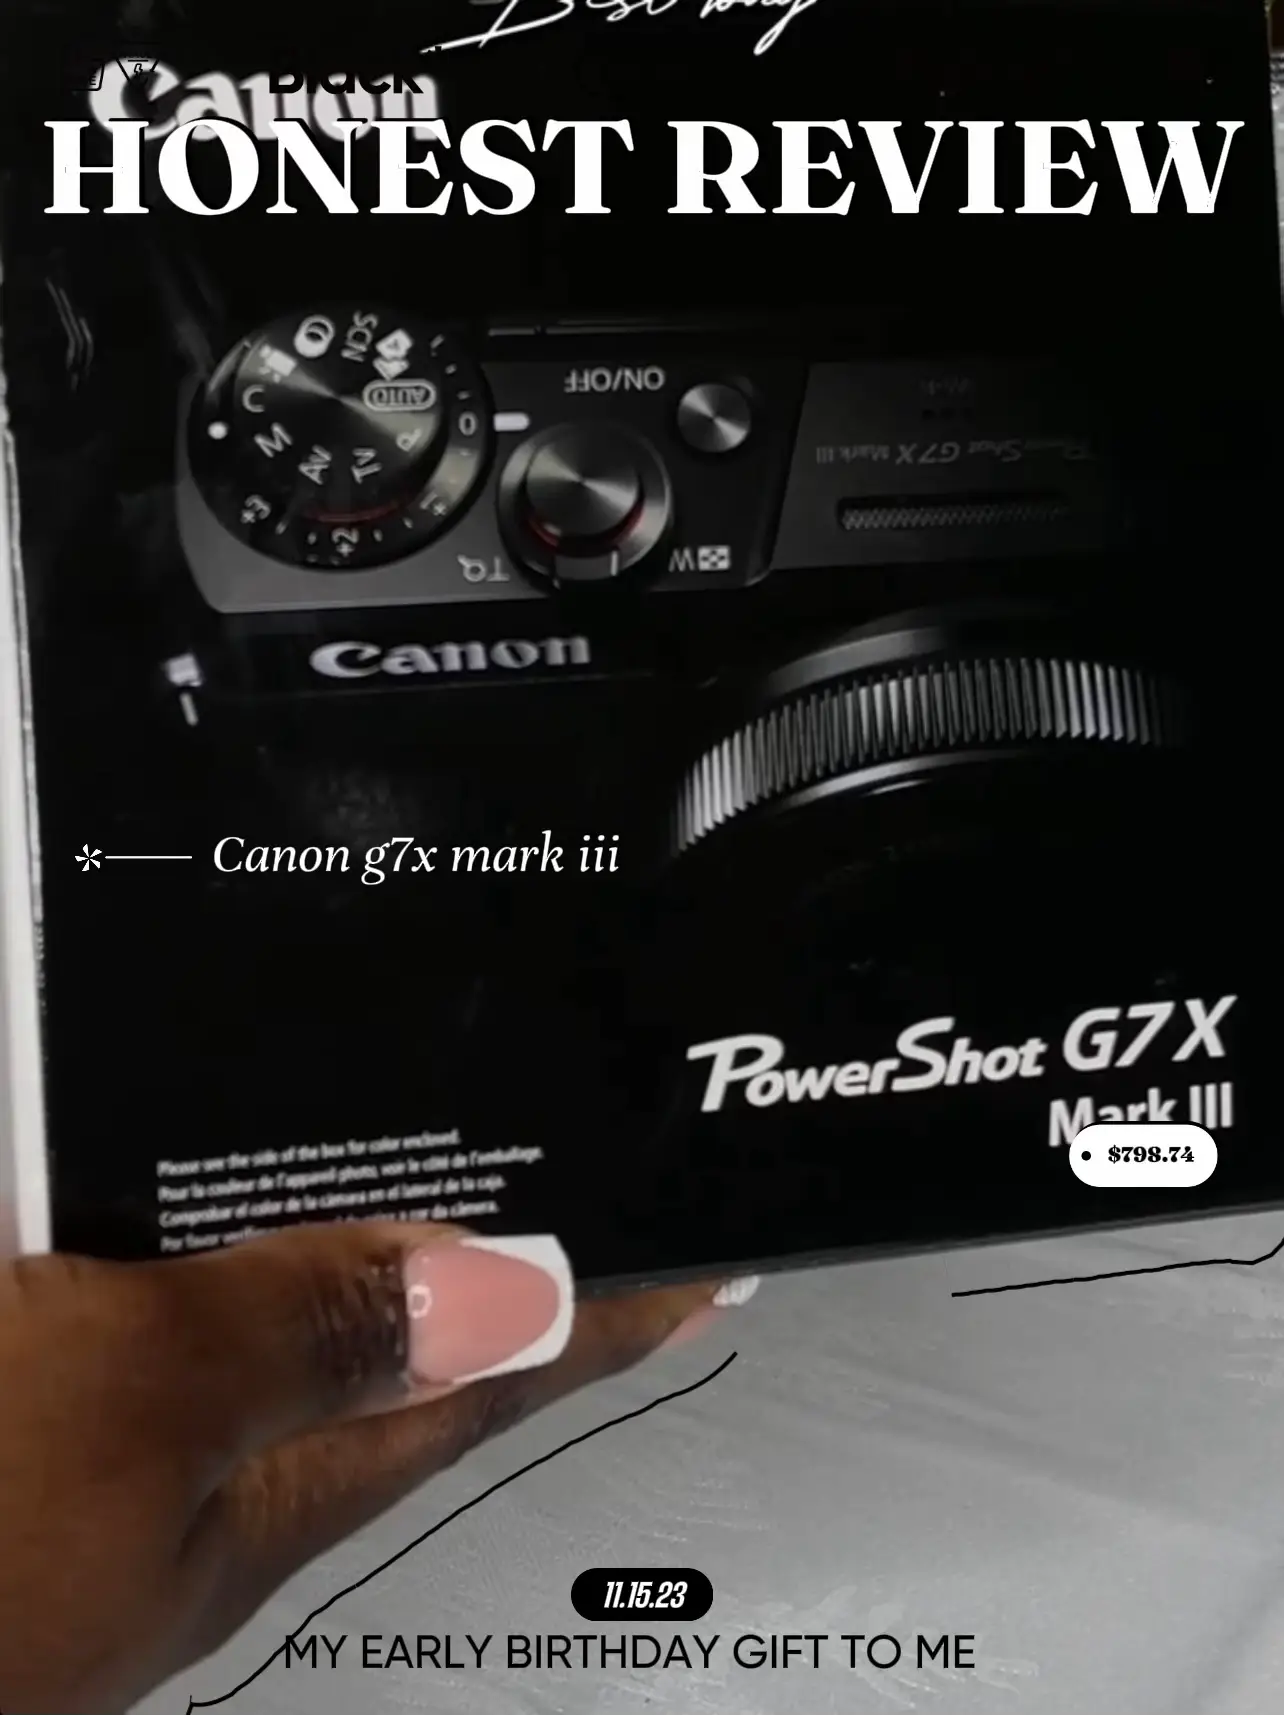 Canon powershot G7 X Mark III review: A lightweight camera for